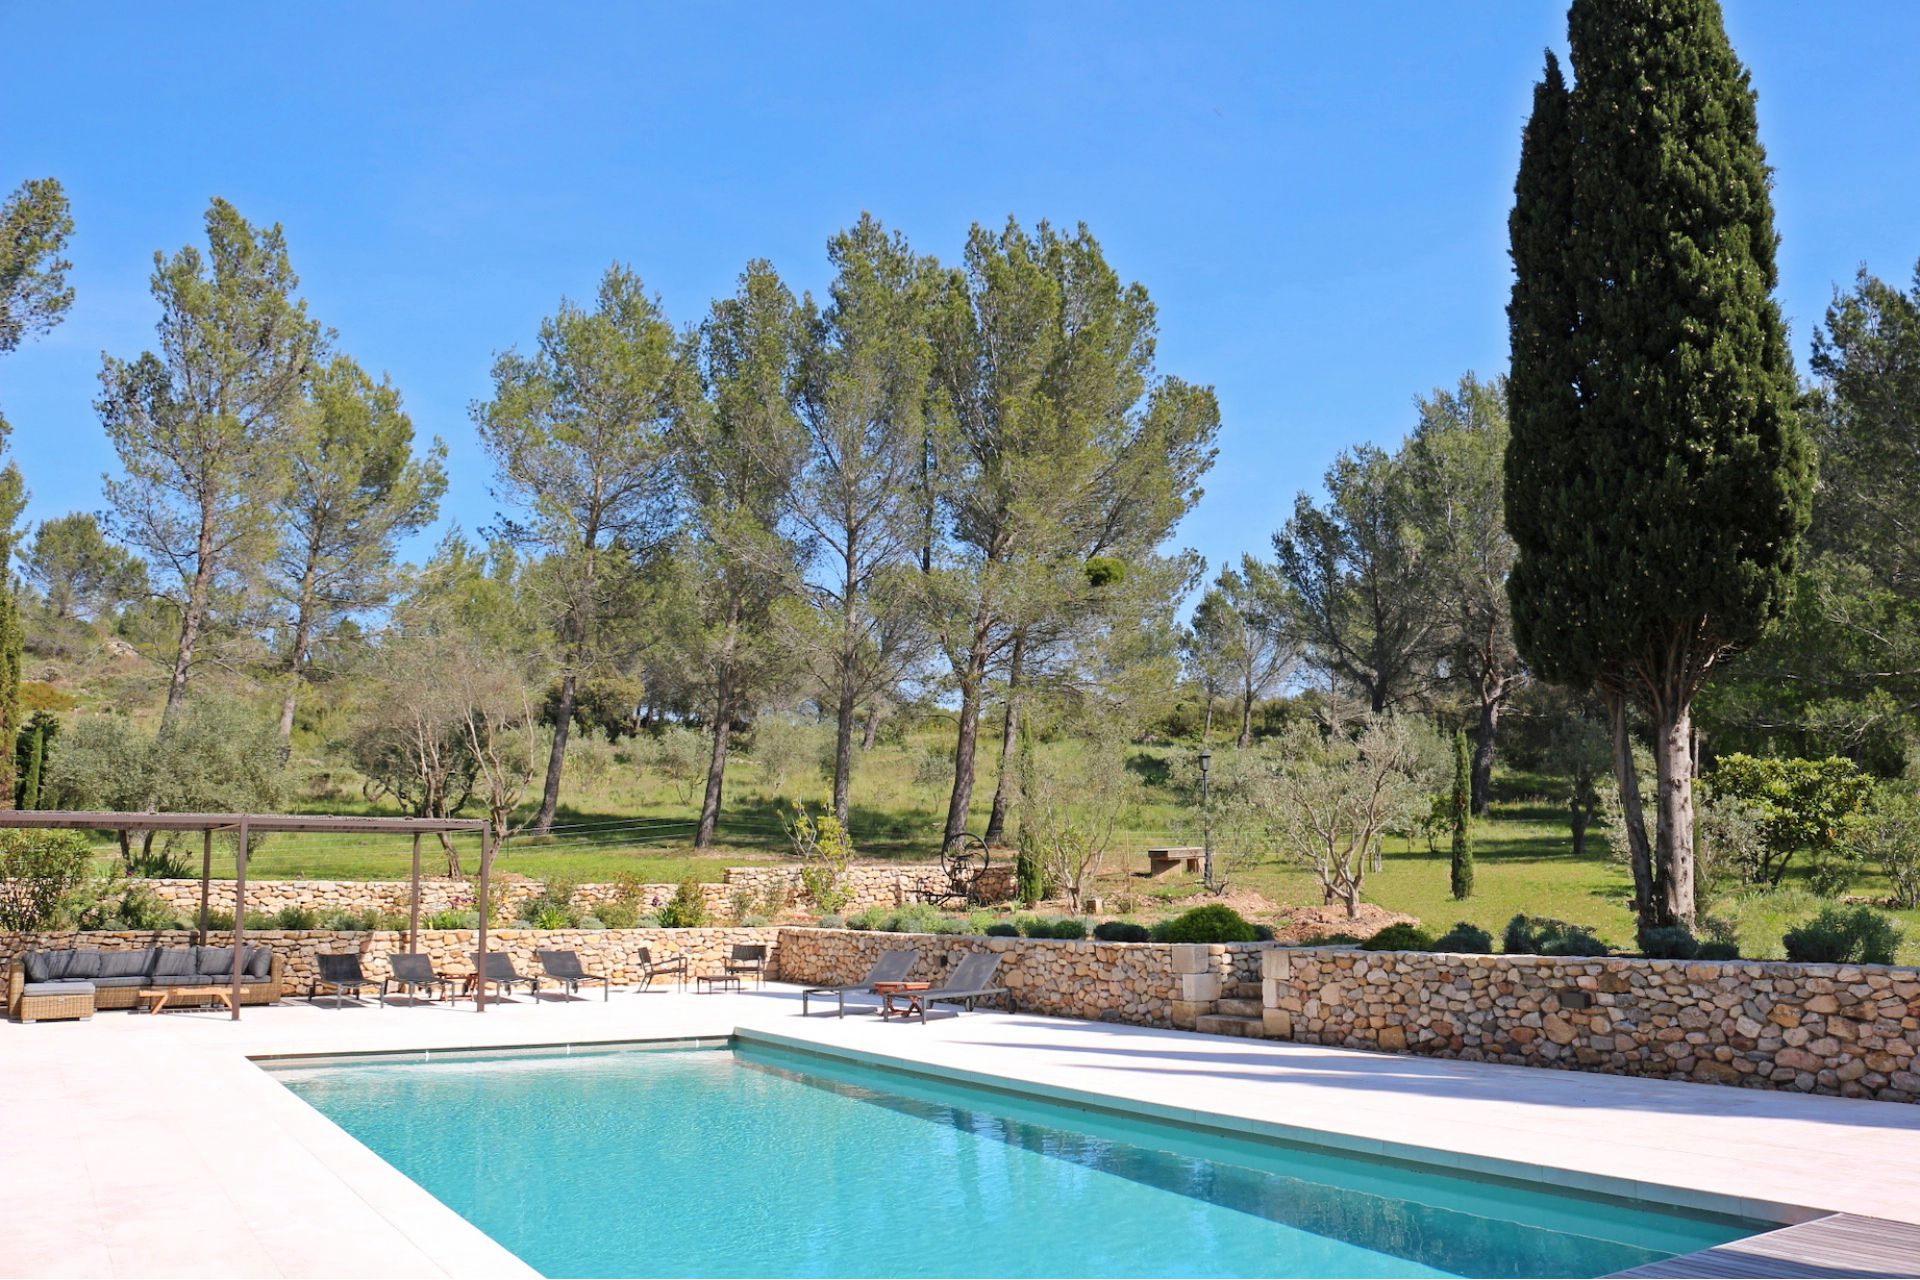 Méditerranée Location Mas with Private pool in Fontvieille, Provence